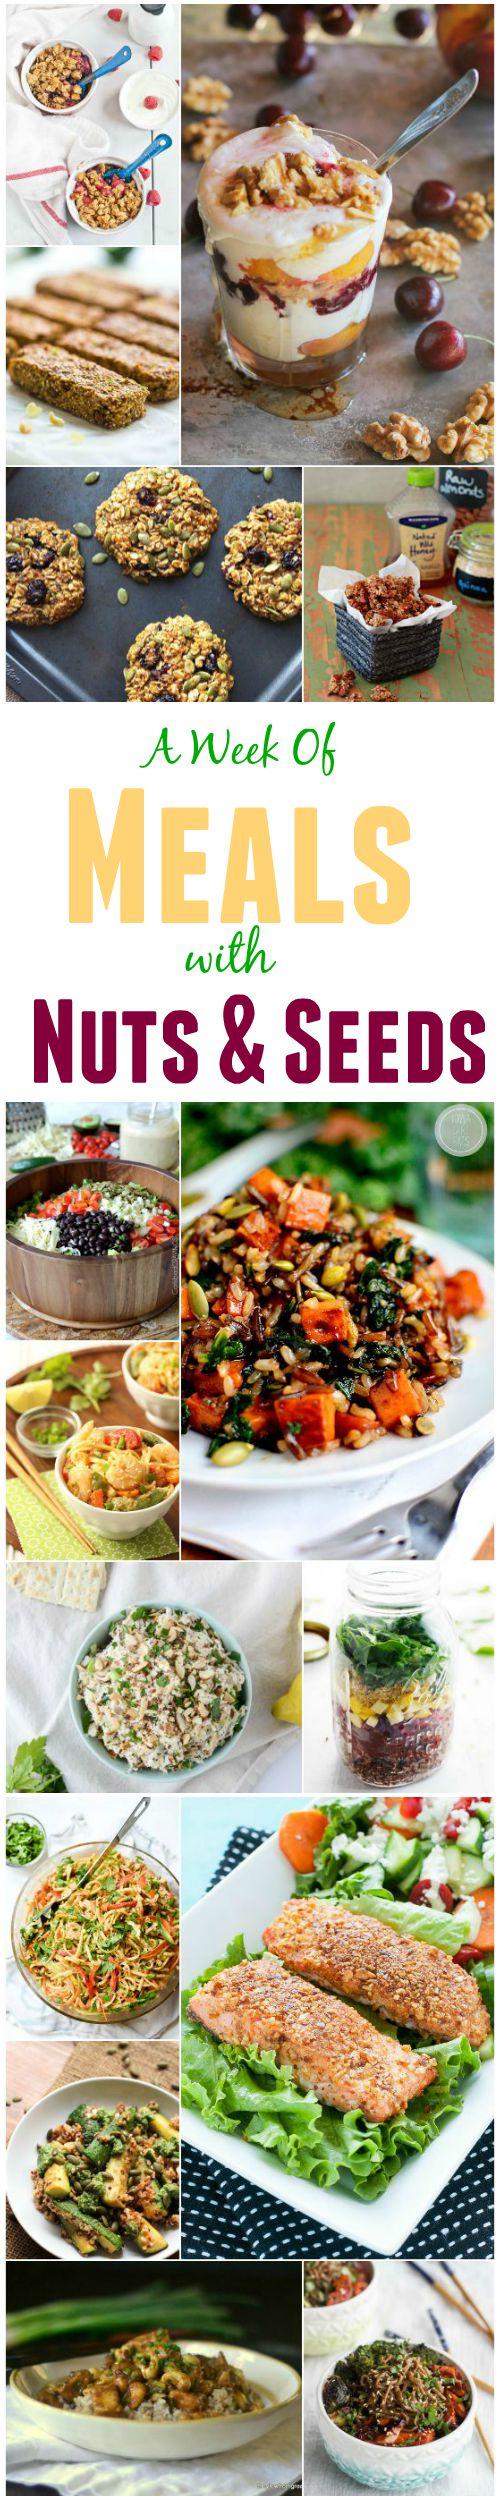 A Weekly Meal Plan with recipes that include nuts and seeds. Ideas for breakfast, lunch and dinner!